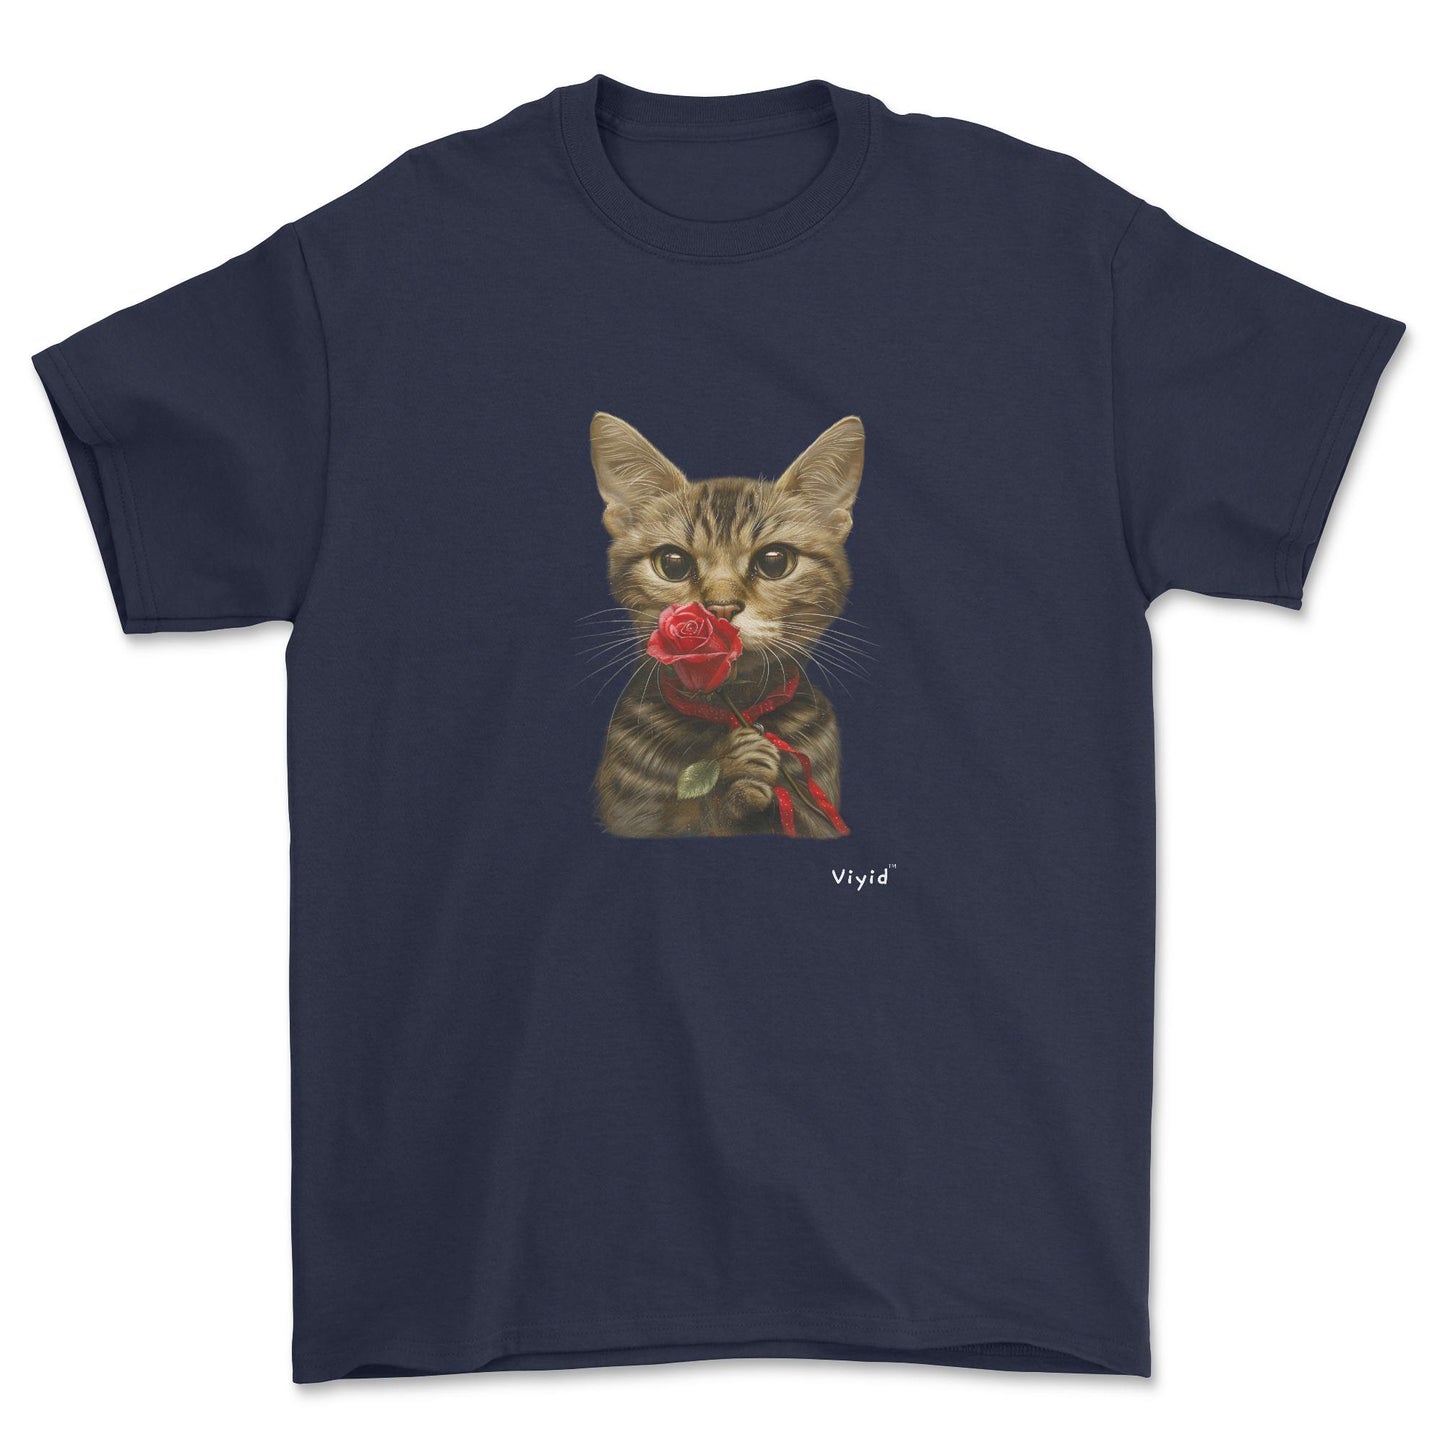 sniffing rose domestic shorthair cat adult t-shirt navy